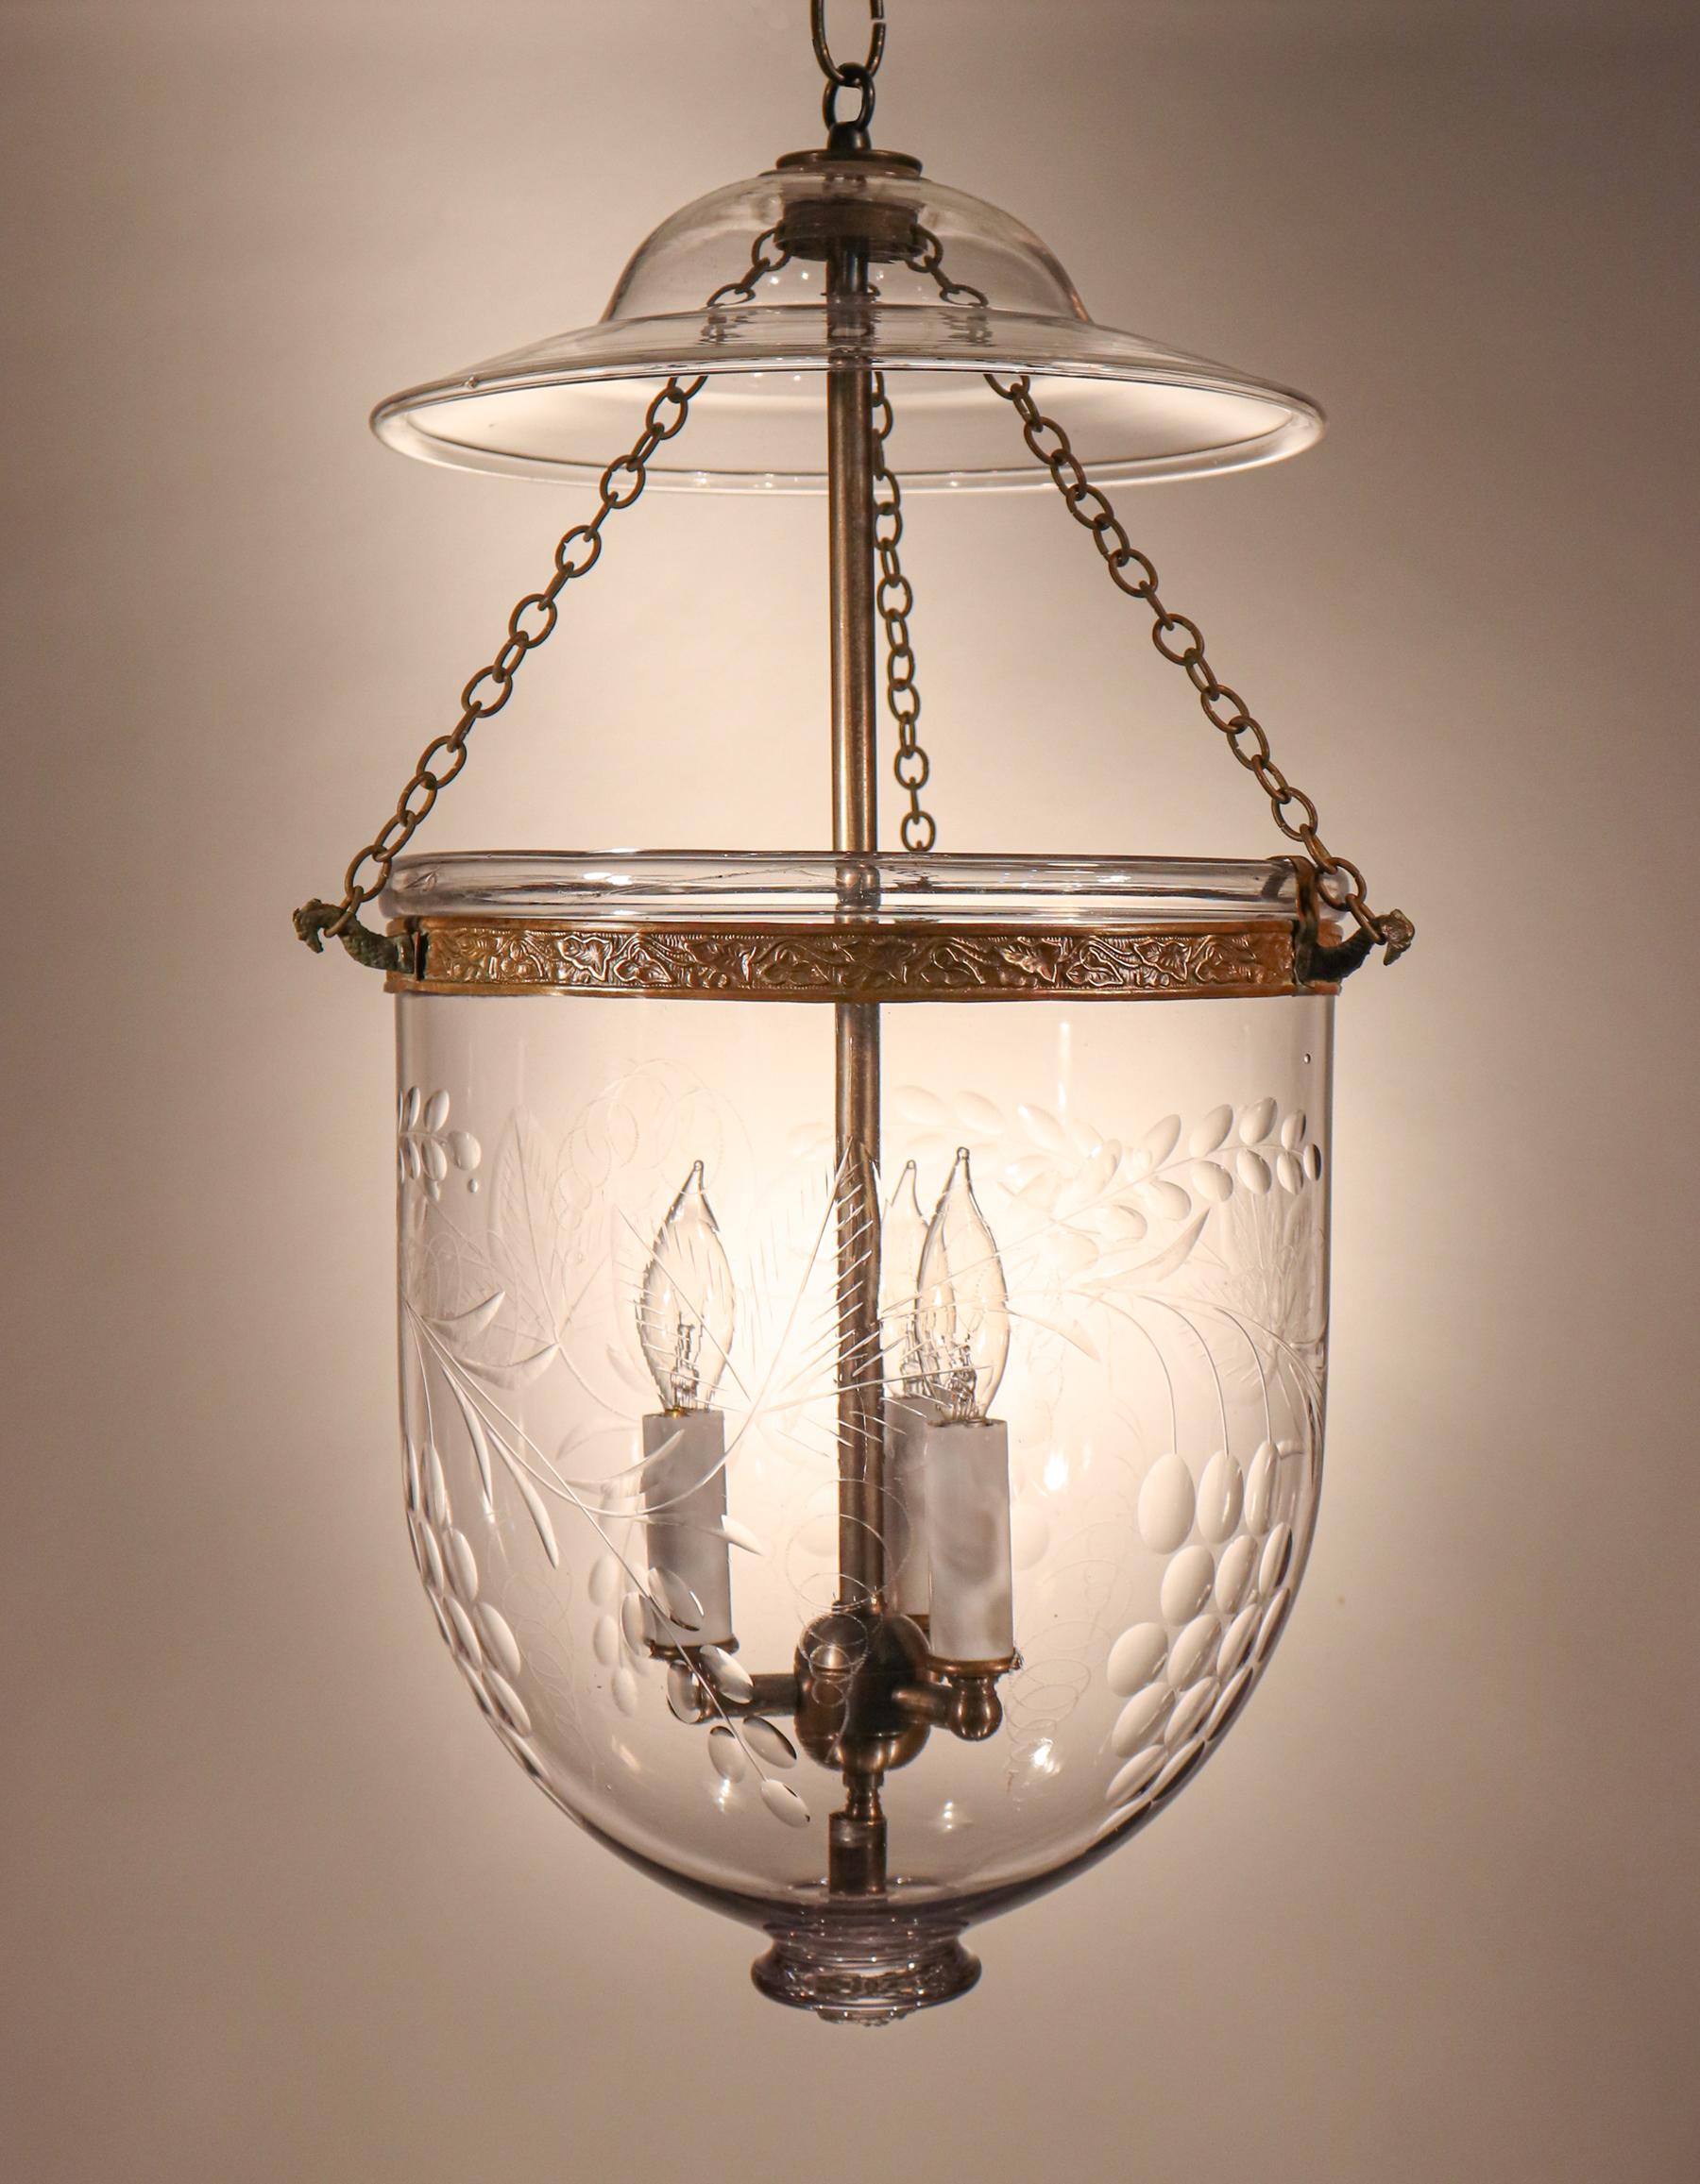 A beautiful antique bell jar lantern from England, circa 1880, with superb quality hand blown glass and an etched and polished grape and leaf design. The pendant light has all of its original fittings with the exception of the brass band, which has